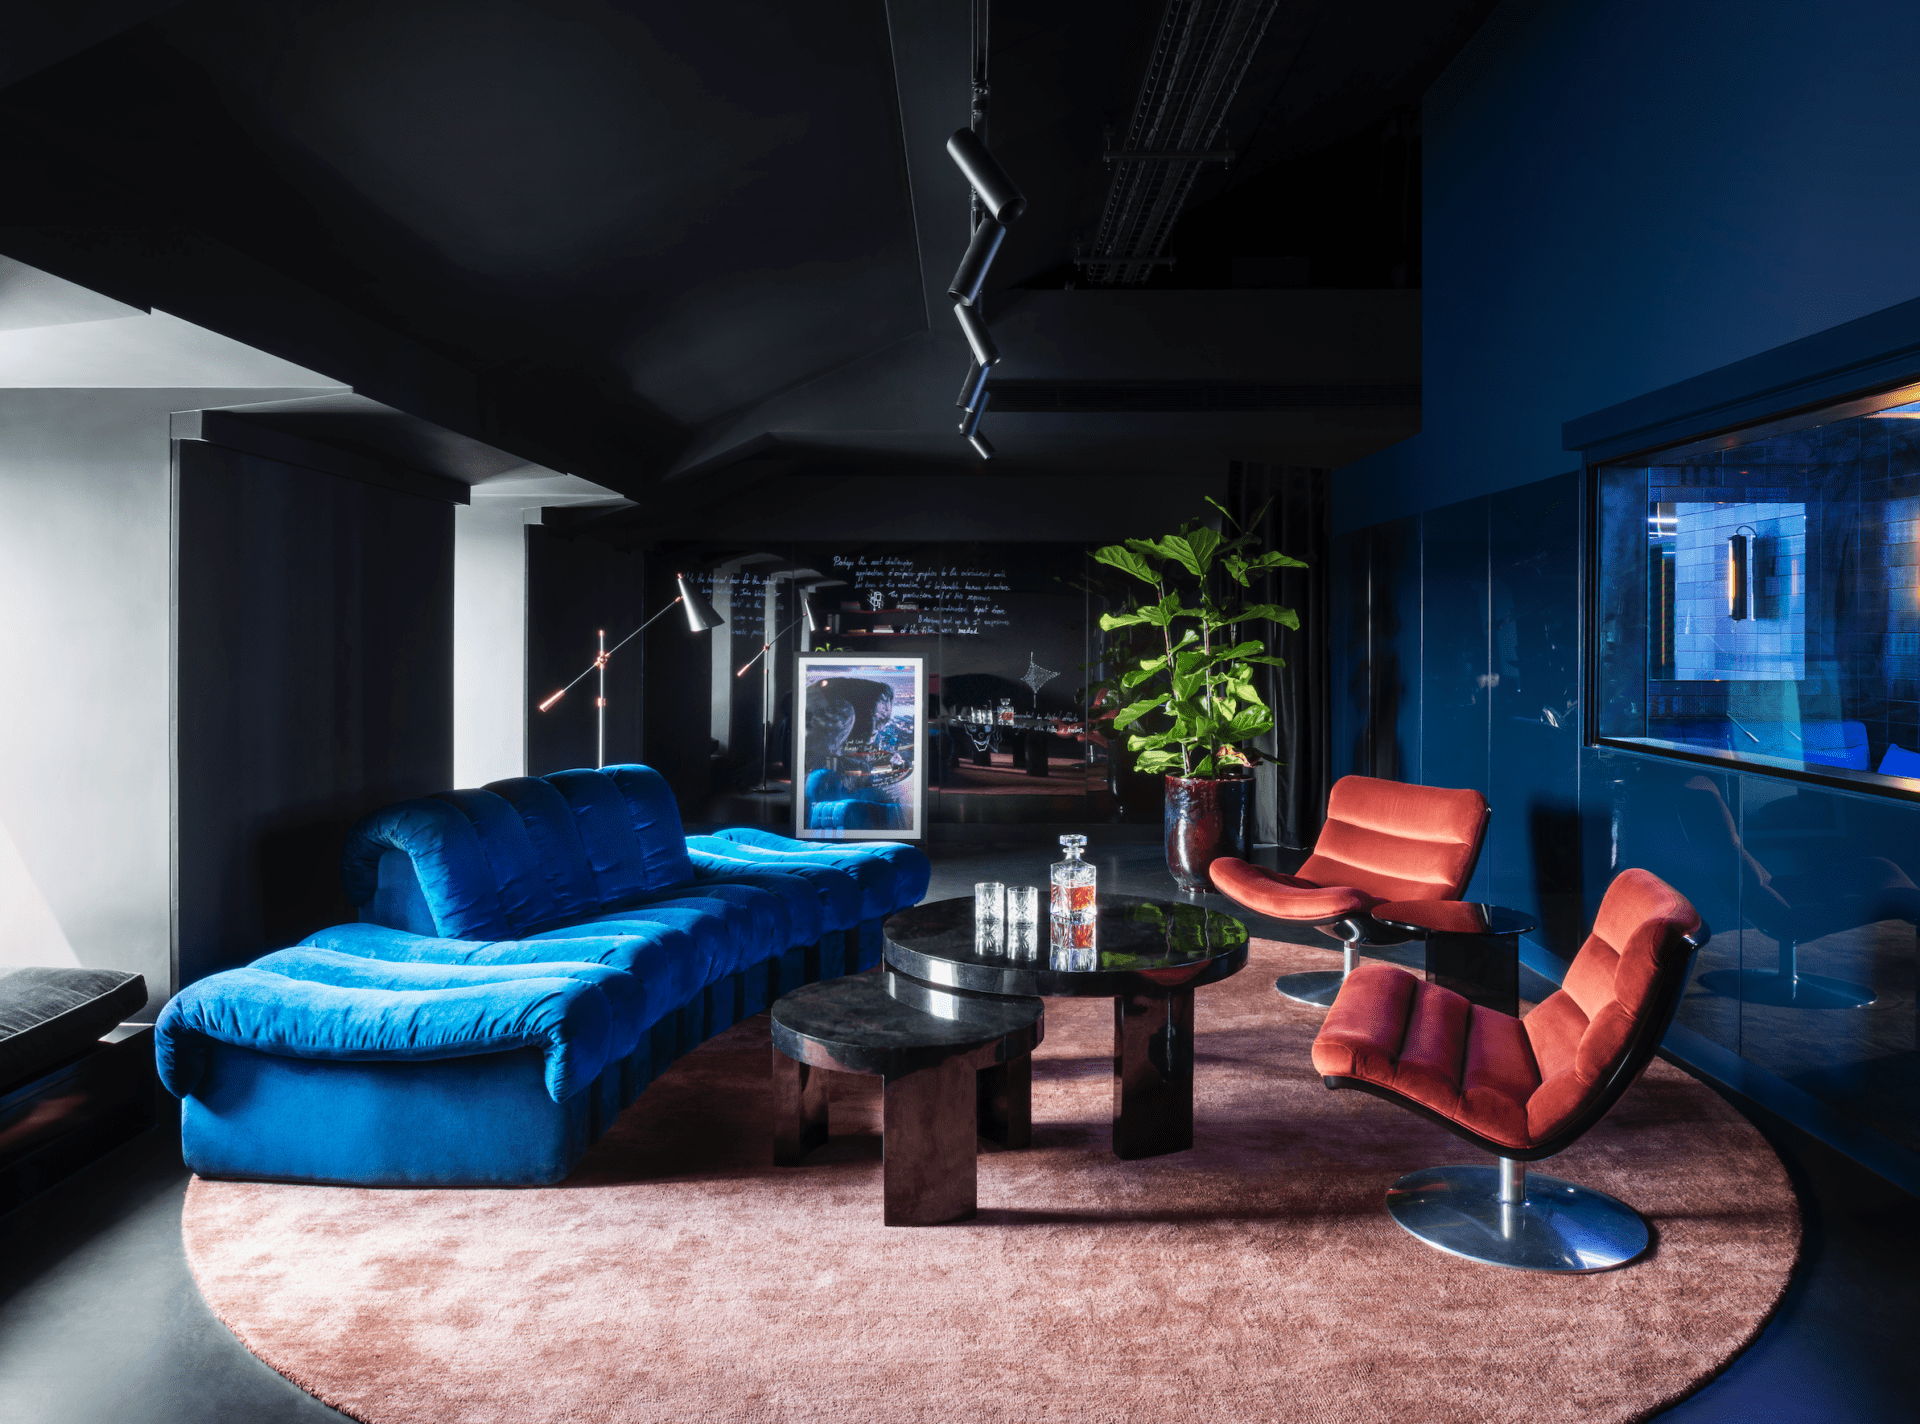 Tala Fustok Studio and TP Bennett use polished concrete and sharp neon lighting to create edgy office interior